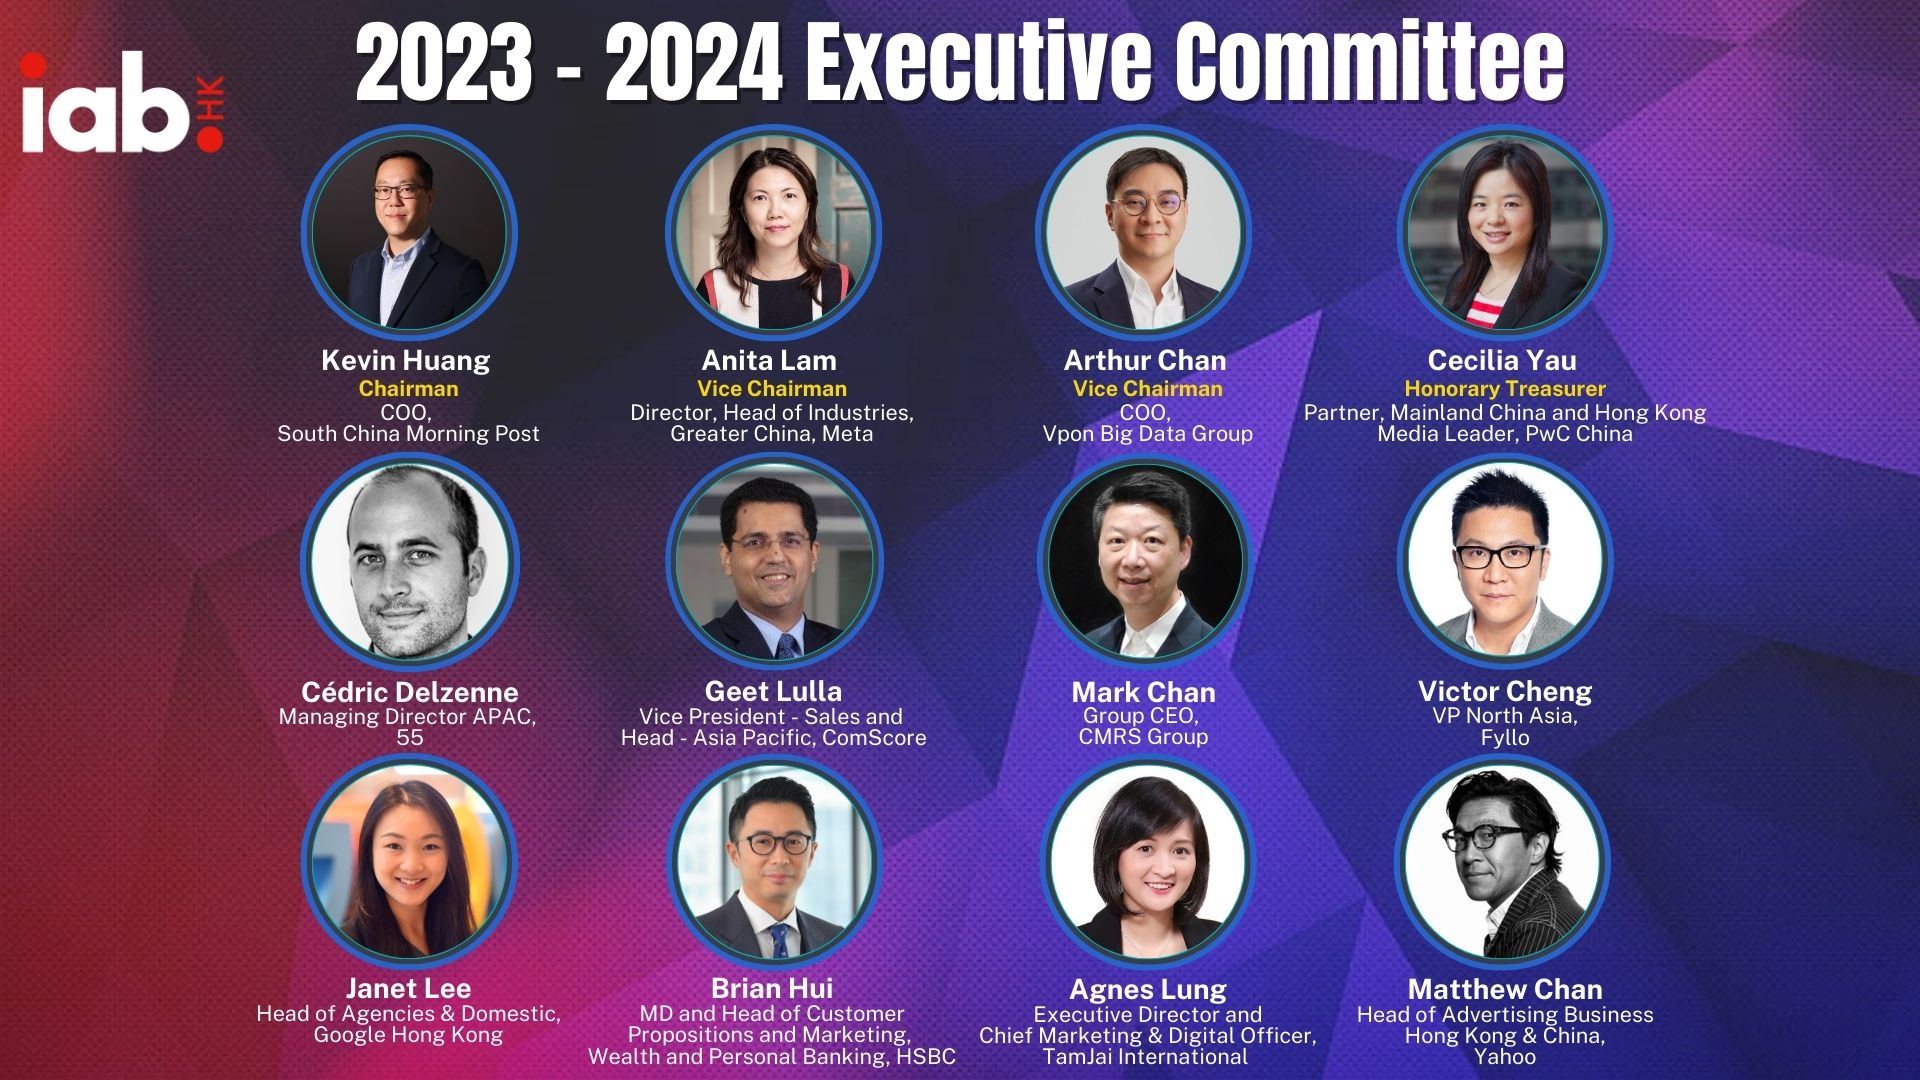 Announcement of 2023－2024 Executive Committee and 2023 Working